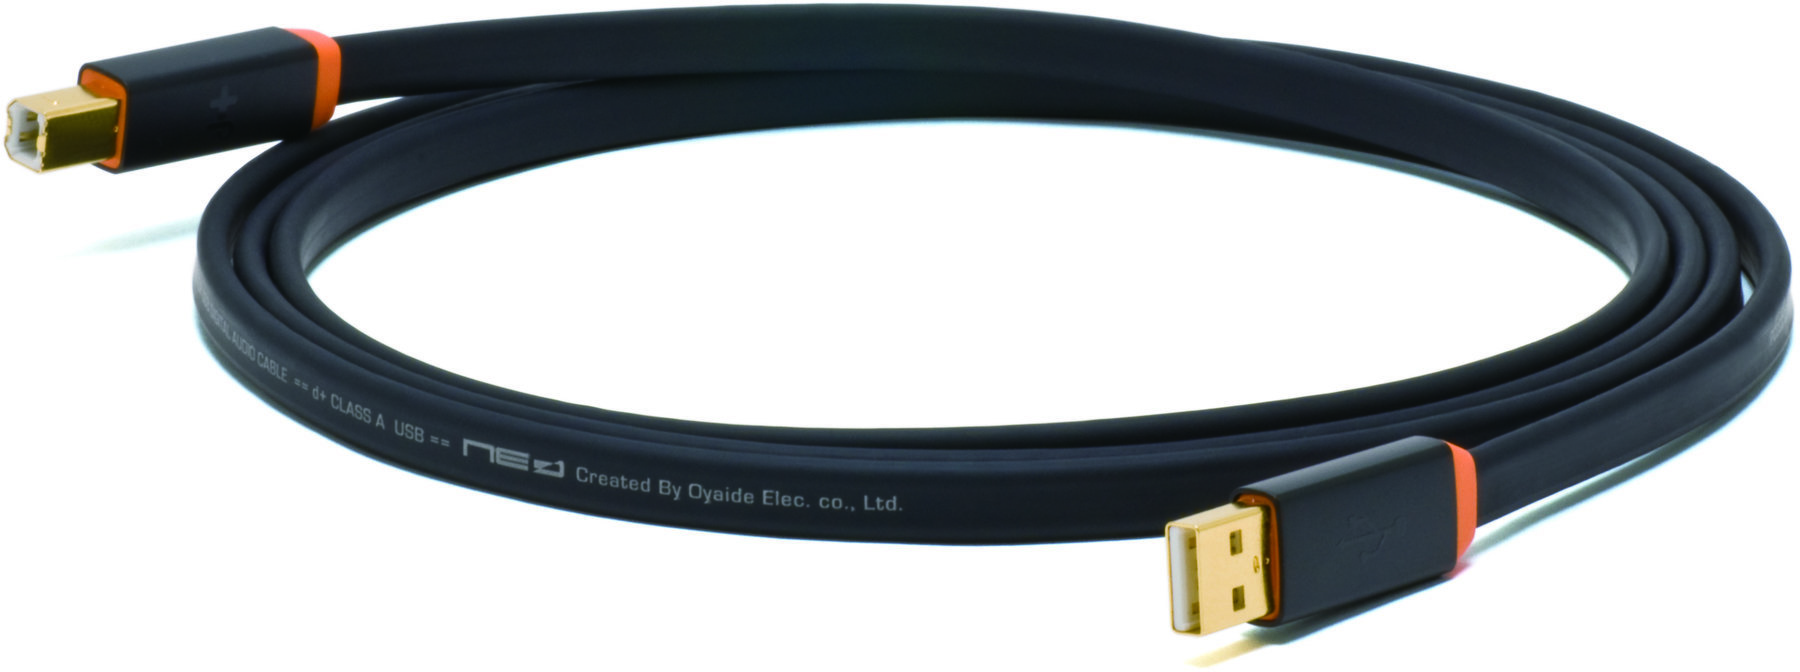 USB Cable Oyaide NEO d+ USB 2.0 Class A 3m